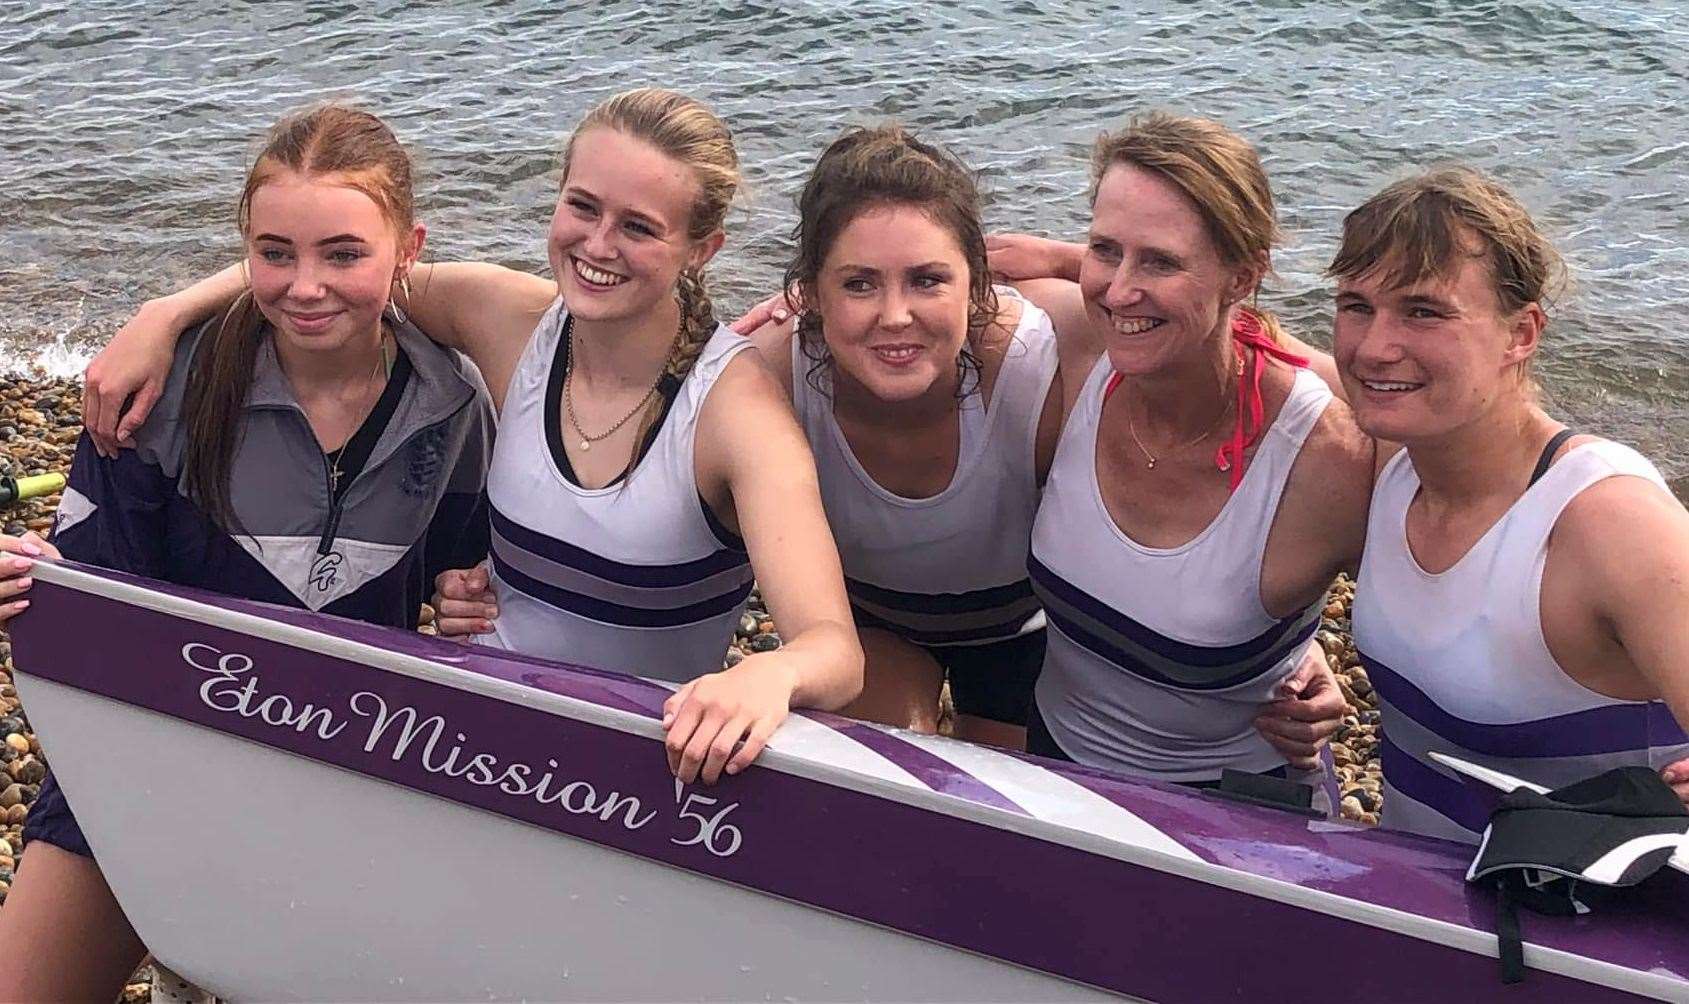 Deal Rowing Club’s women’s senior four crew of, from left, cox Scarlett Morgan, Maisie-Jayne Lahr, Lois Mullaney, Sharron Mullaney and Vicky Ward